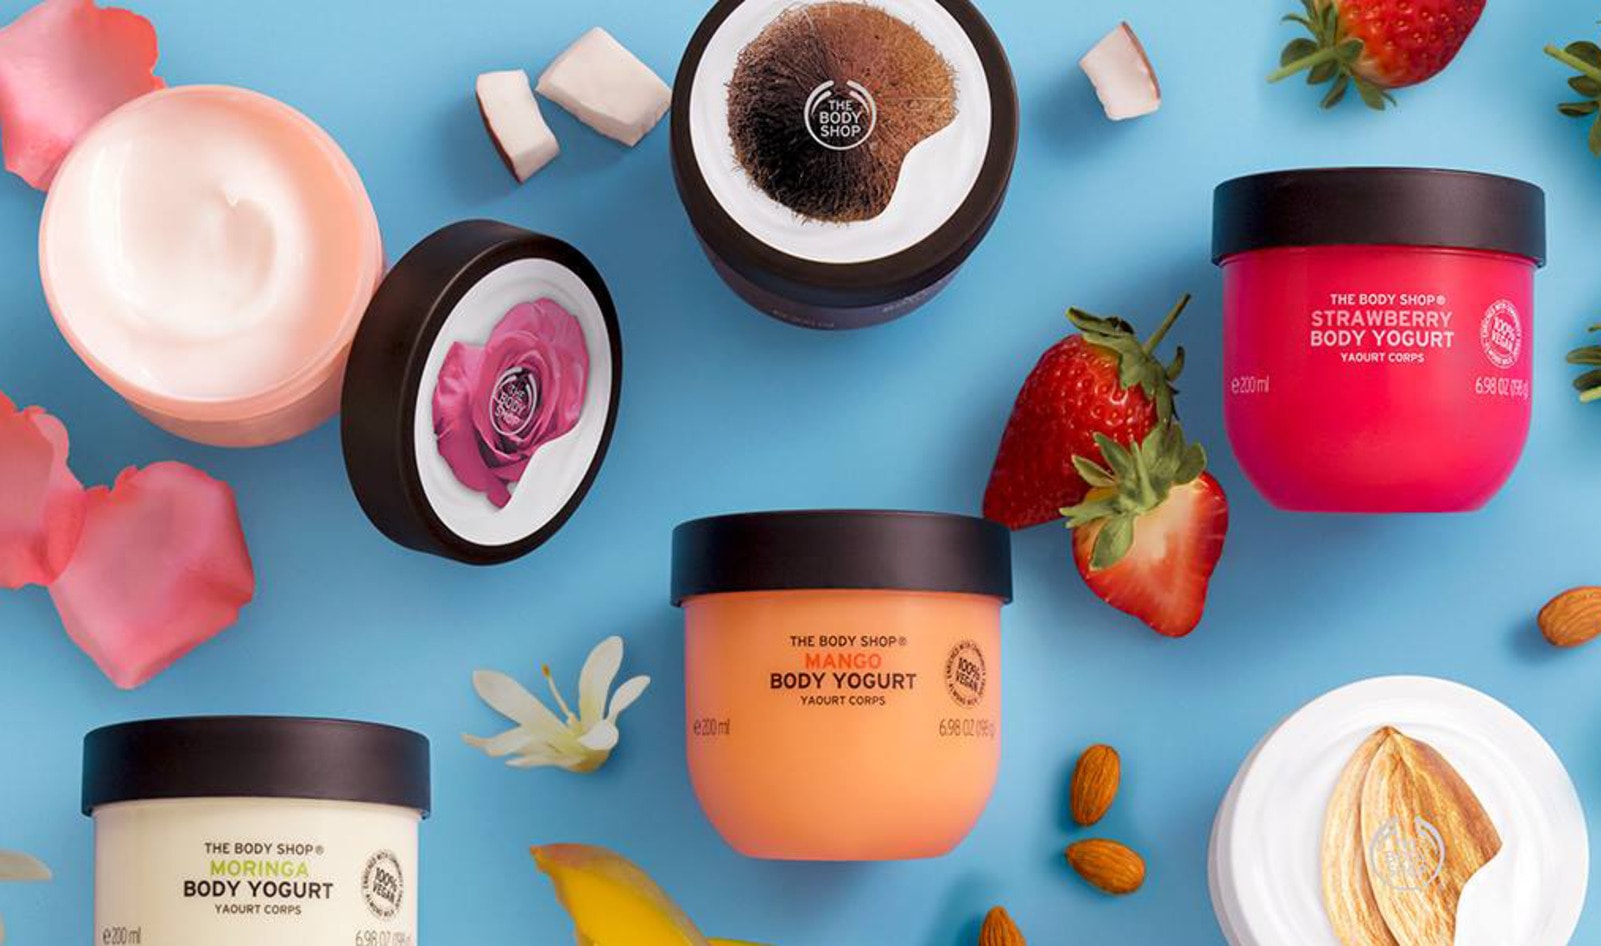 The Body Shop Sold 3 Million Vegan Beauty Products in 2018